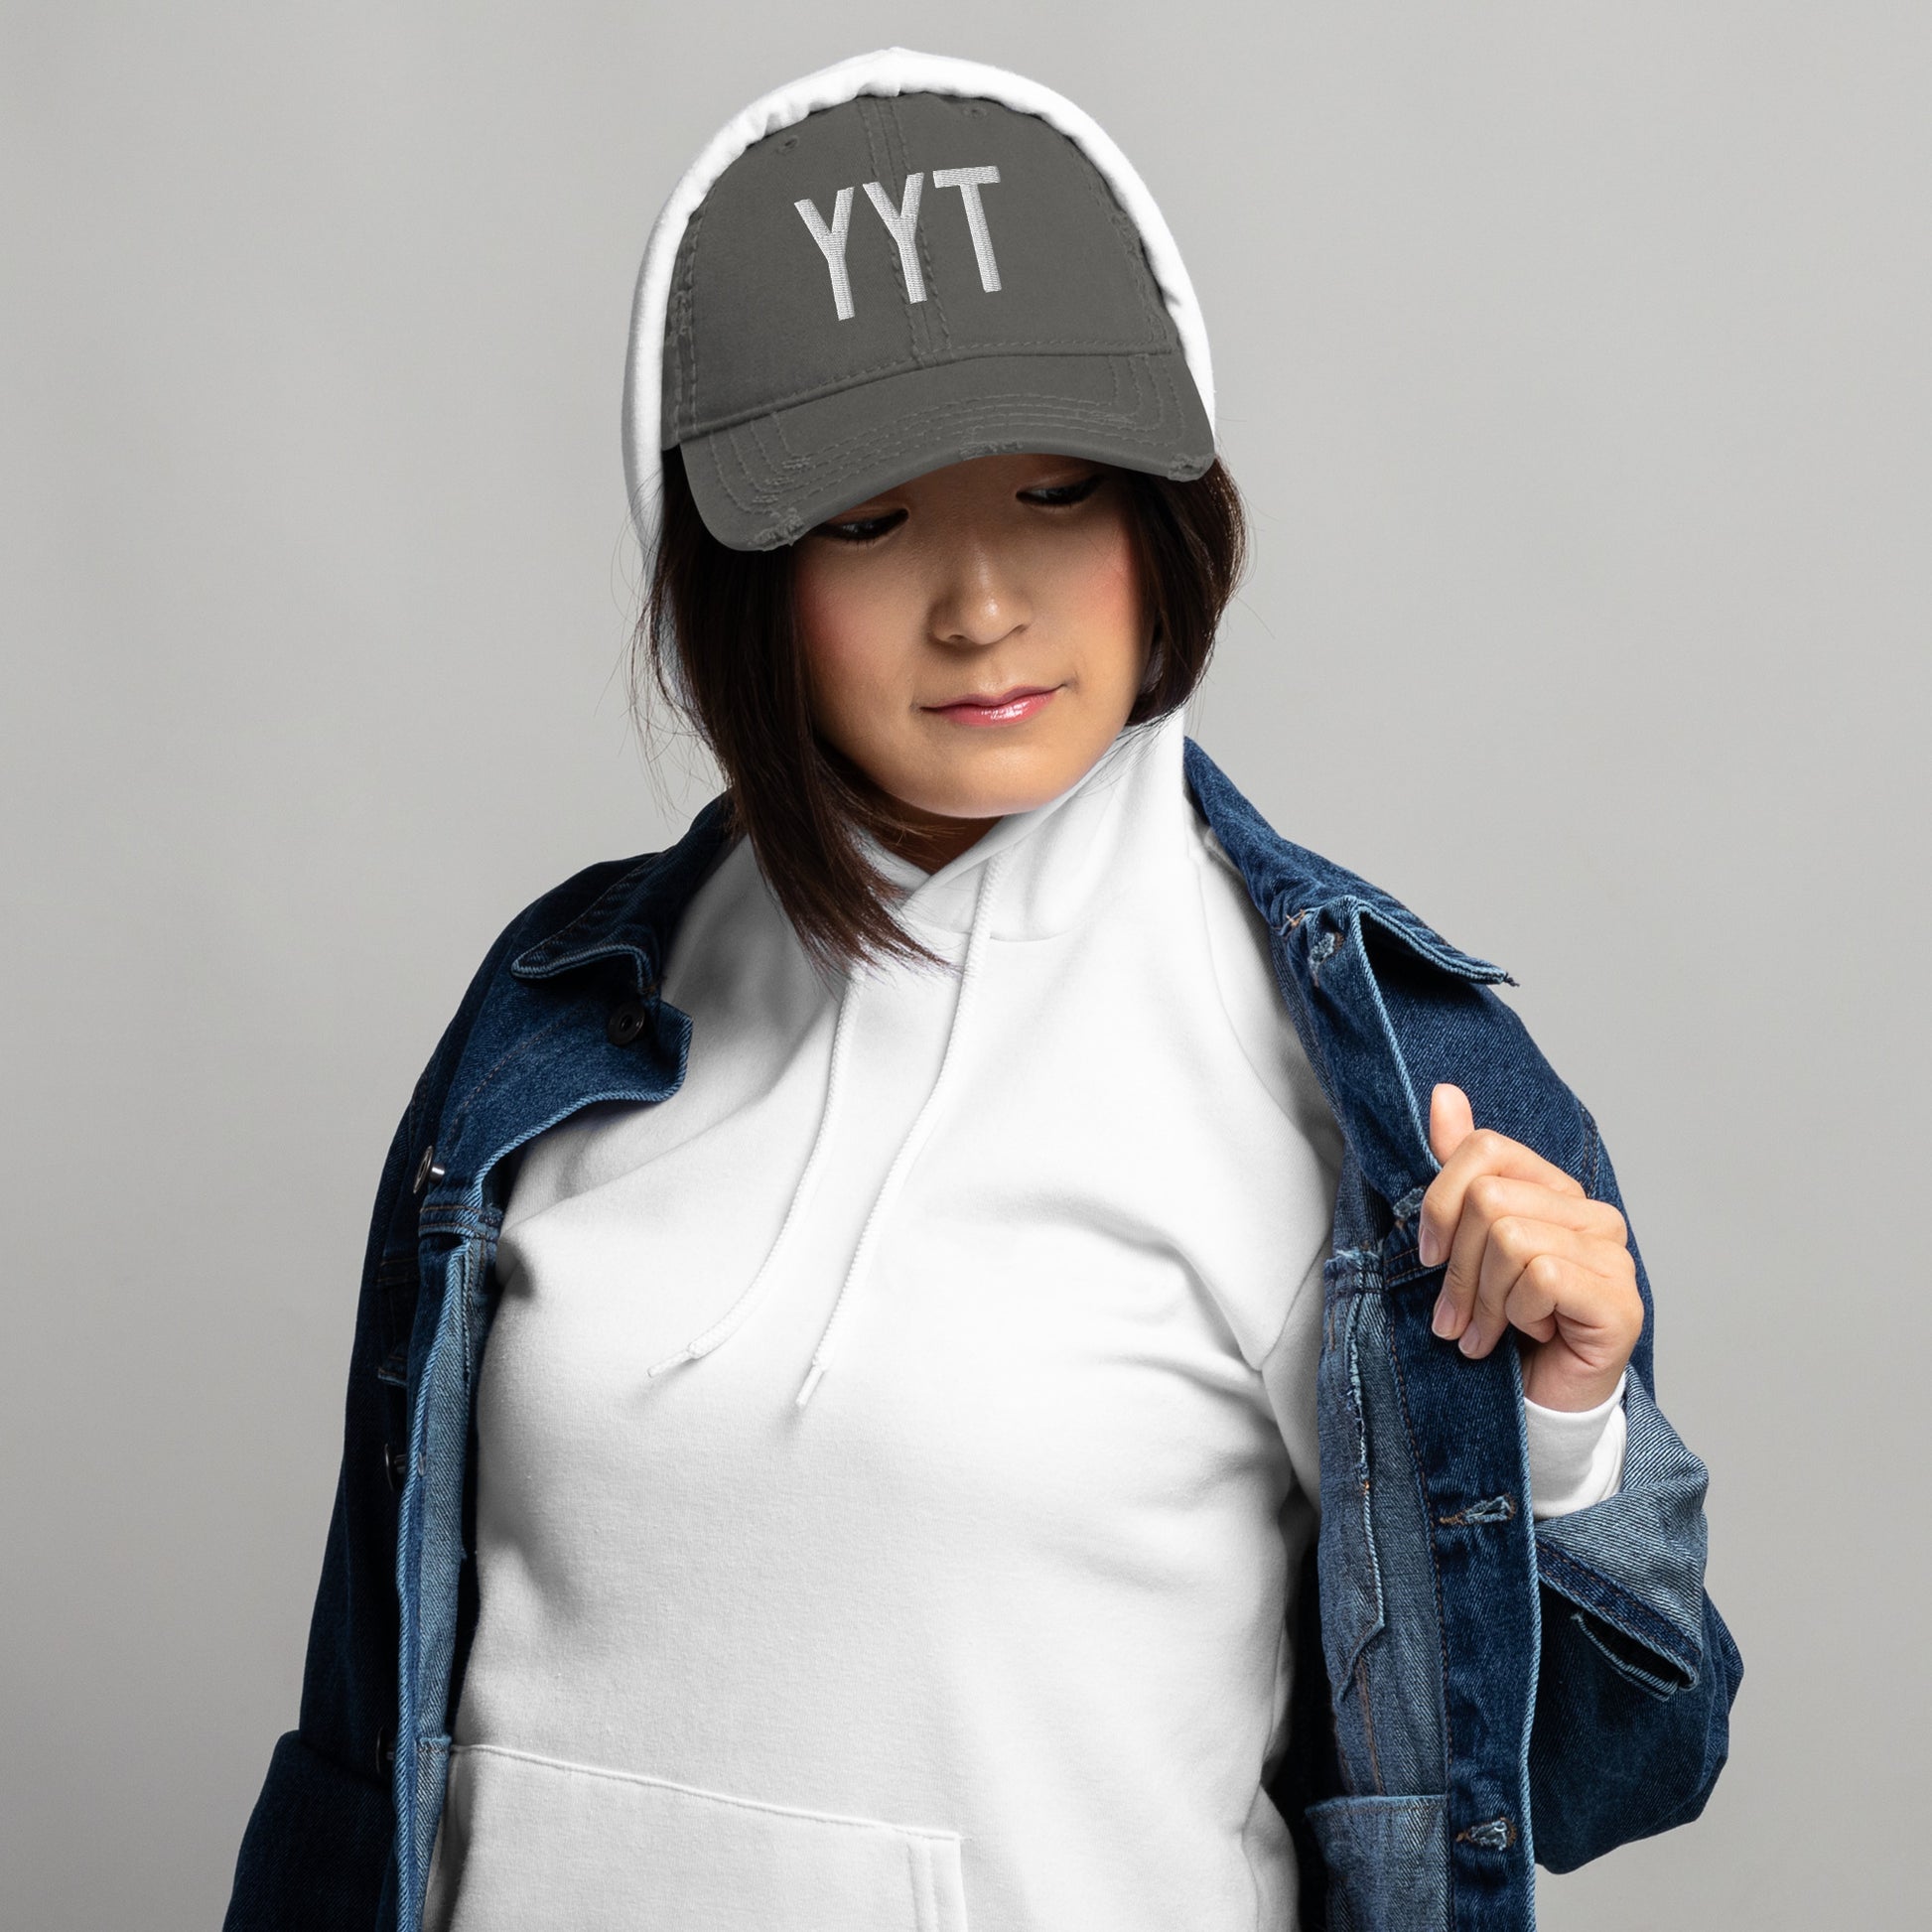 Airport Code Distressed Hat - White • YYT St. John's • YHM Designs - Image 06